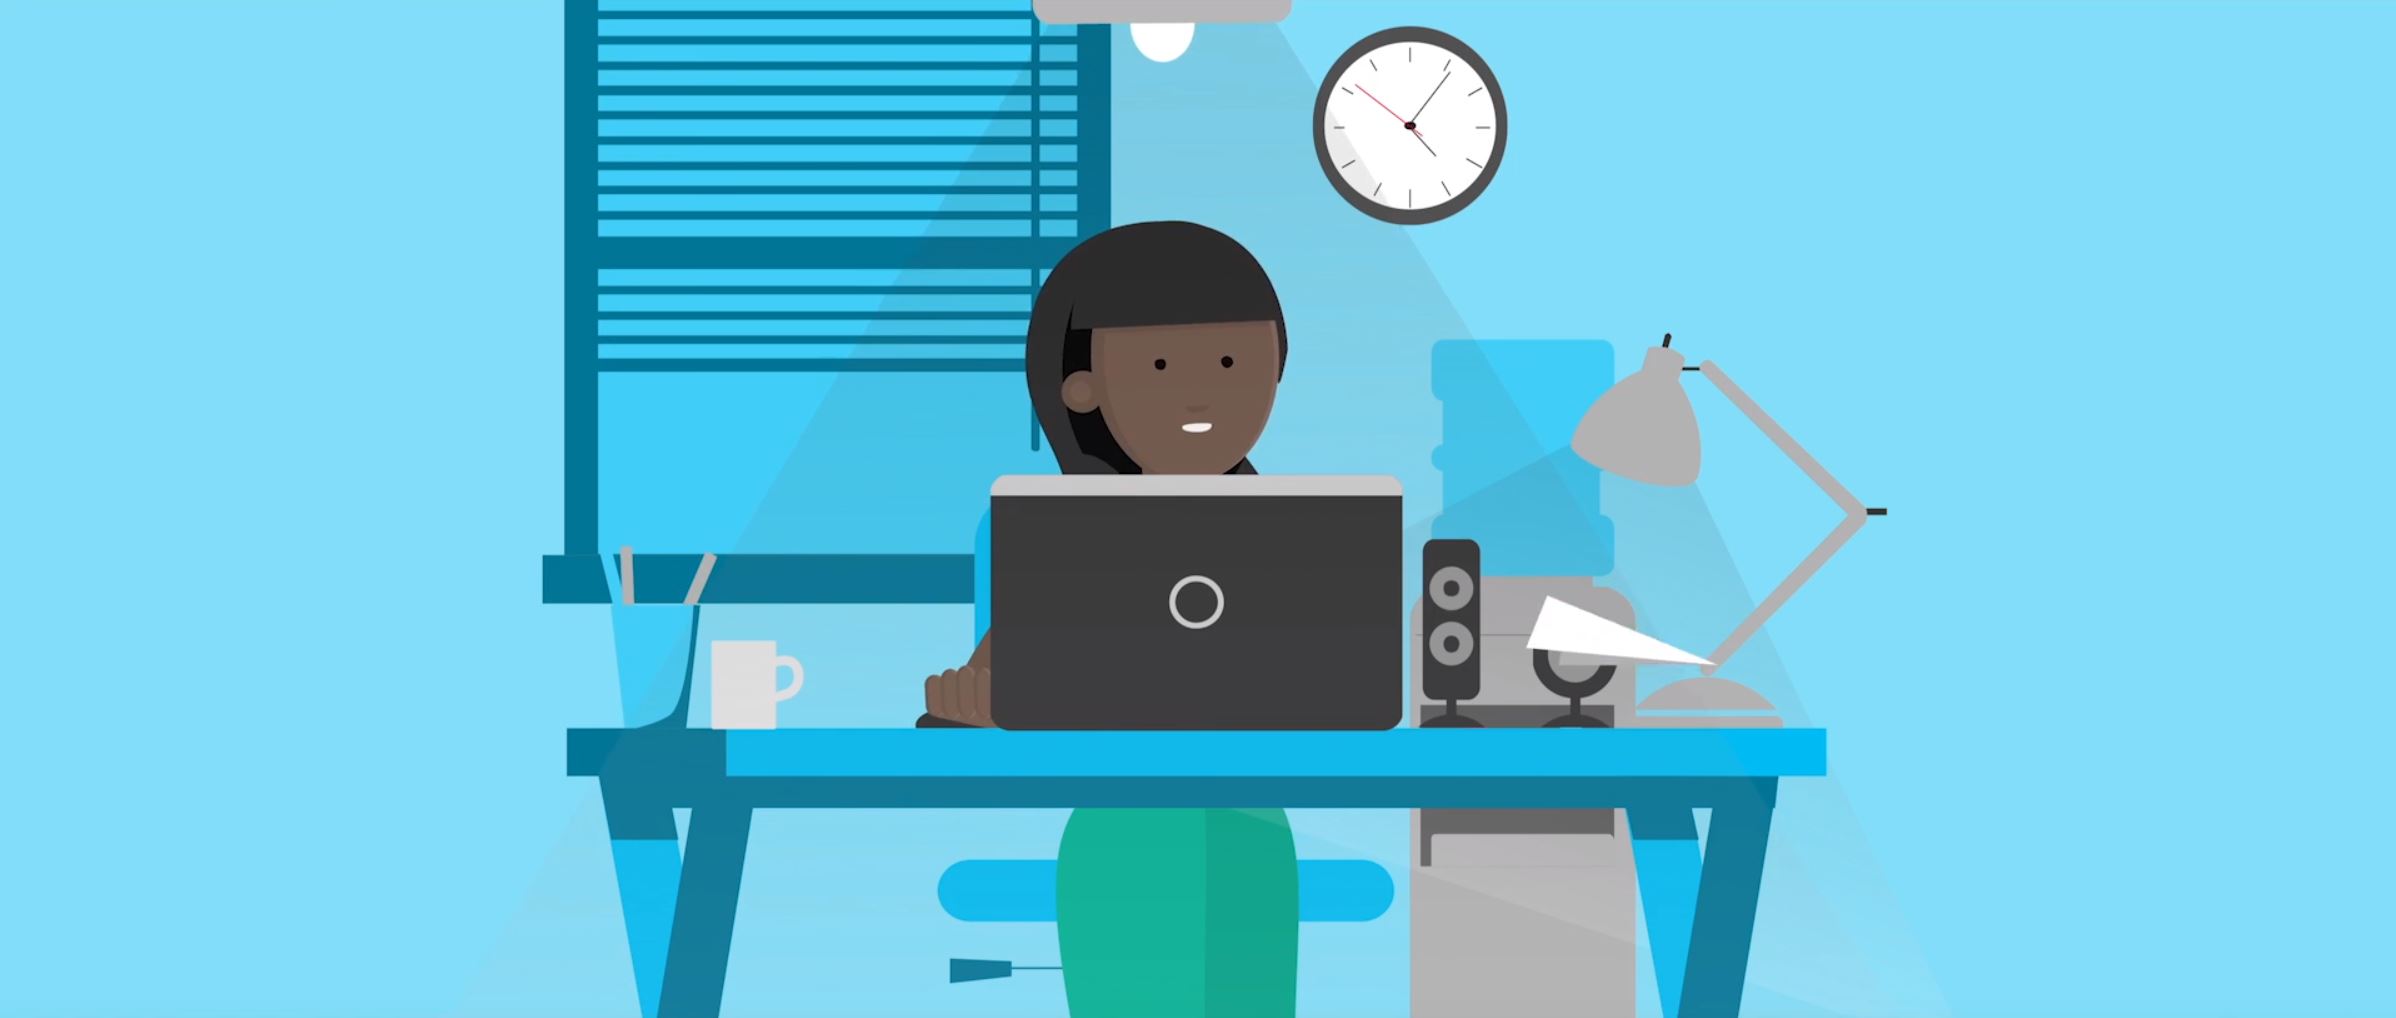 2D character animation image 3 for Microsoft Innovation - retail project